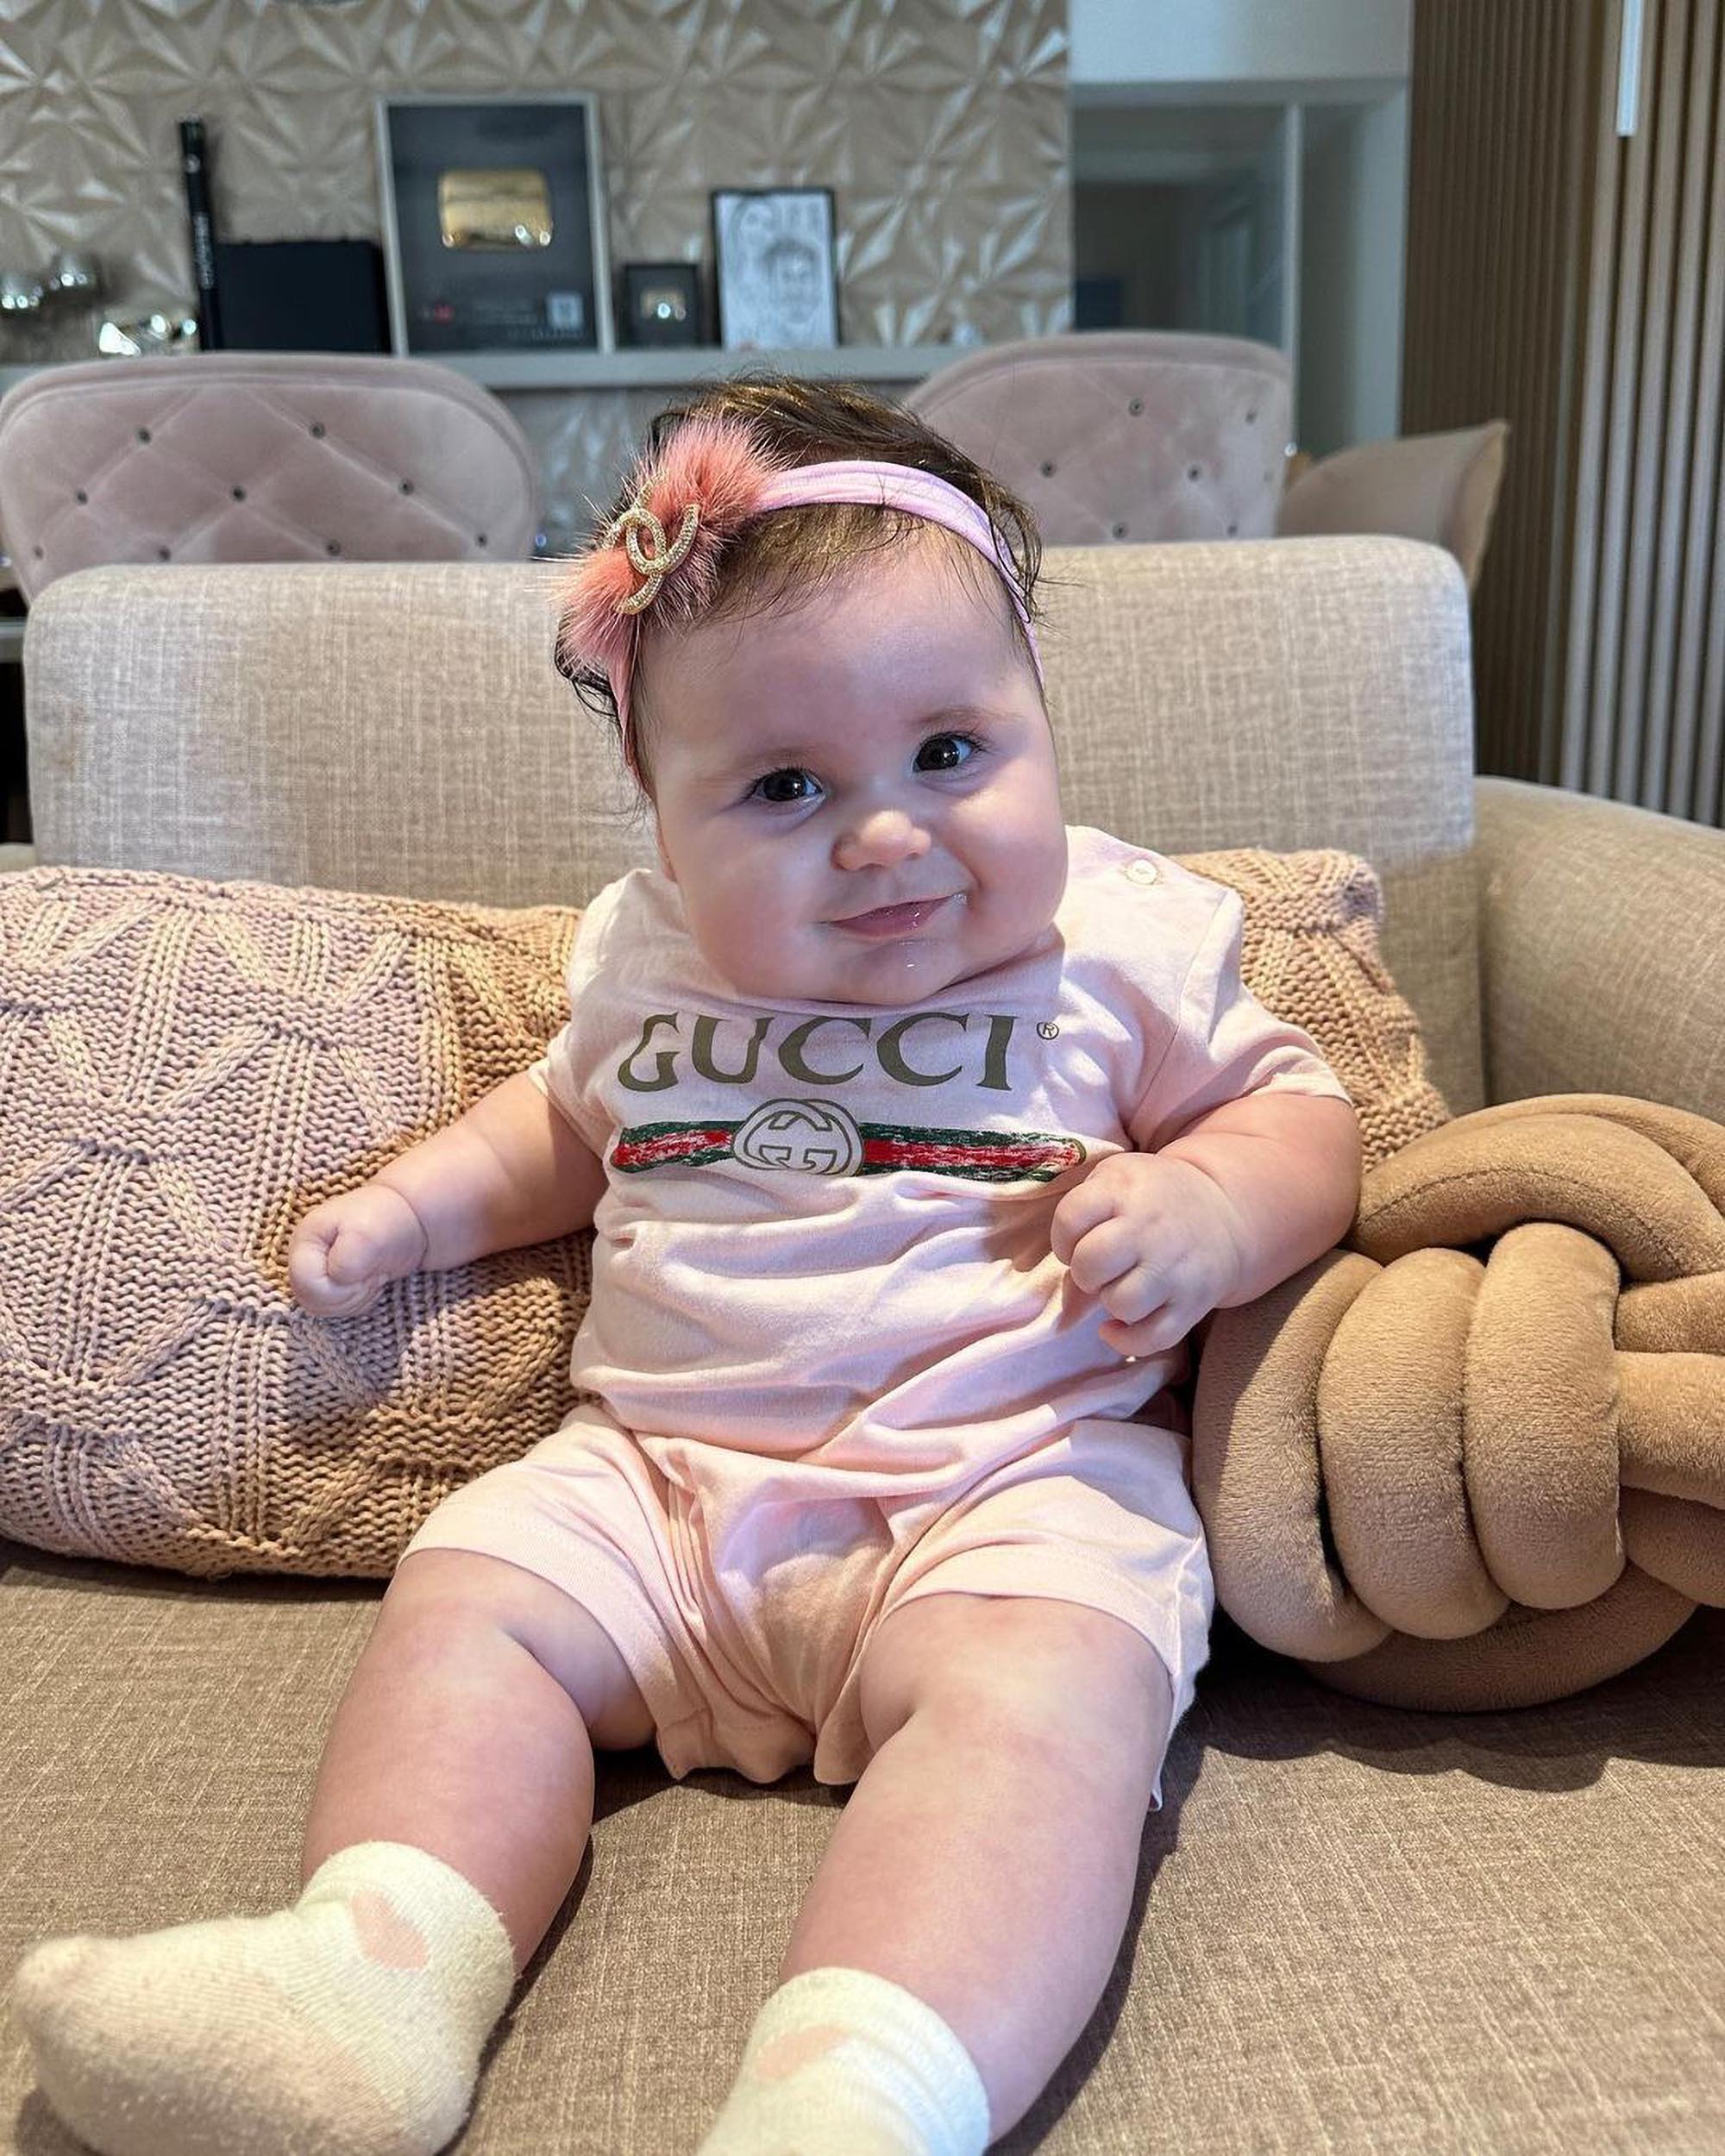 The baby influencer has already earned in millions